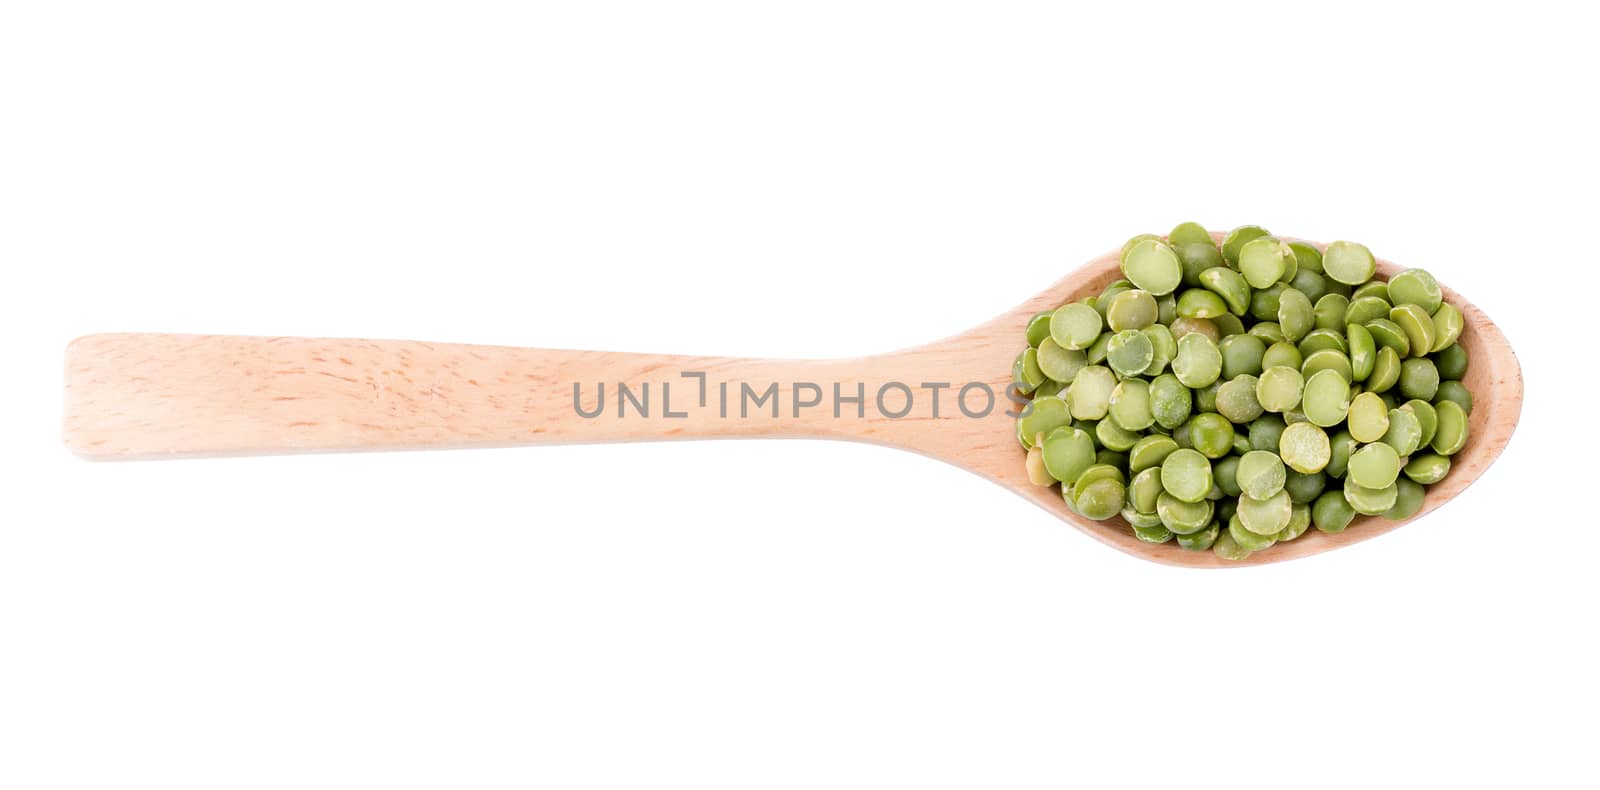 Split Green Peas on wooden spoon isolated on white background by kaiskynet